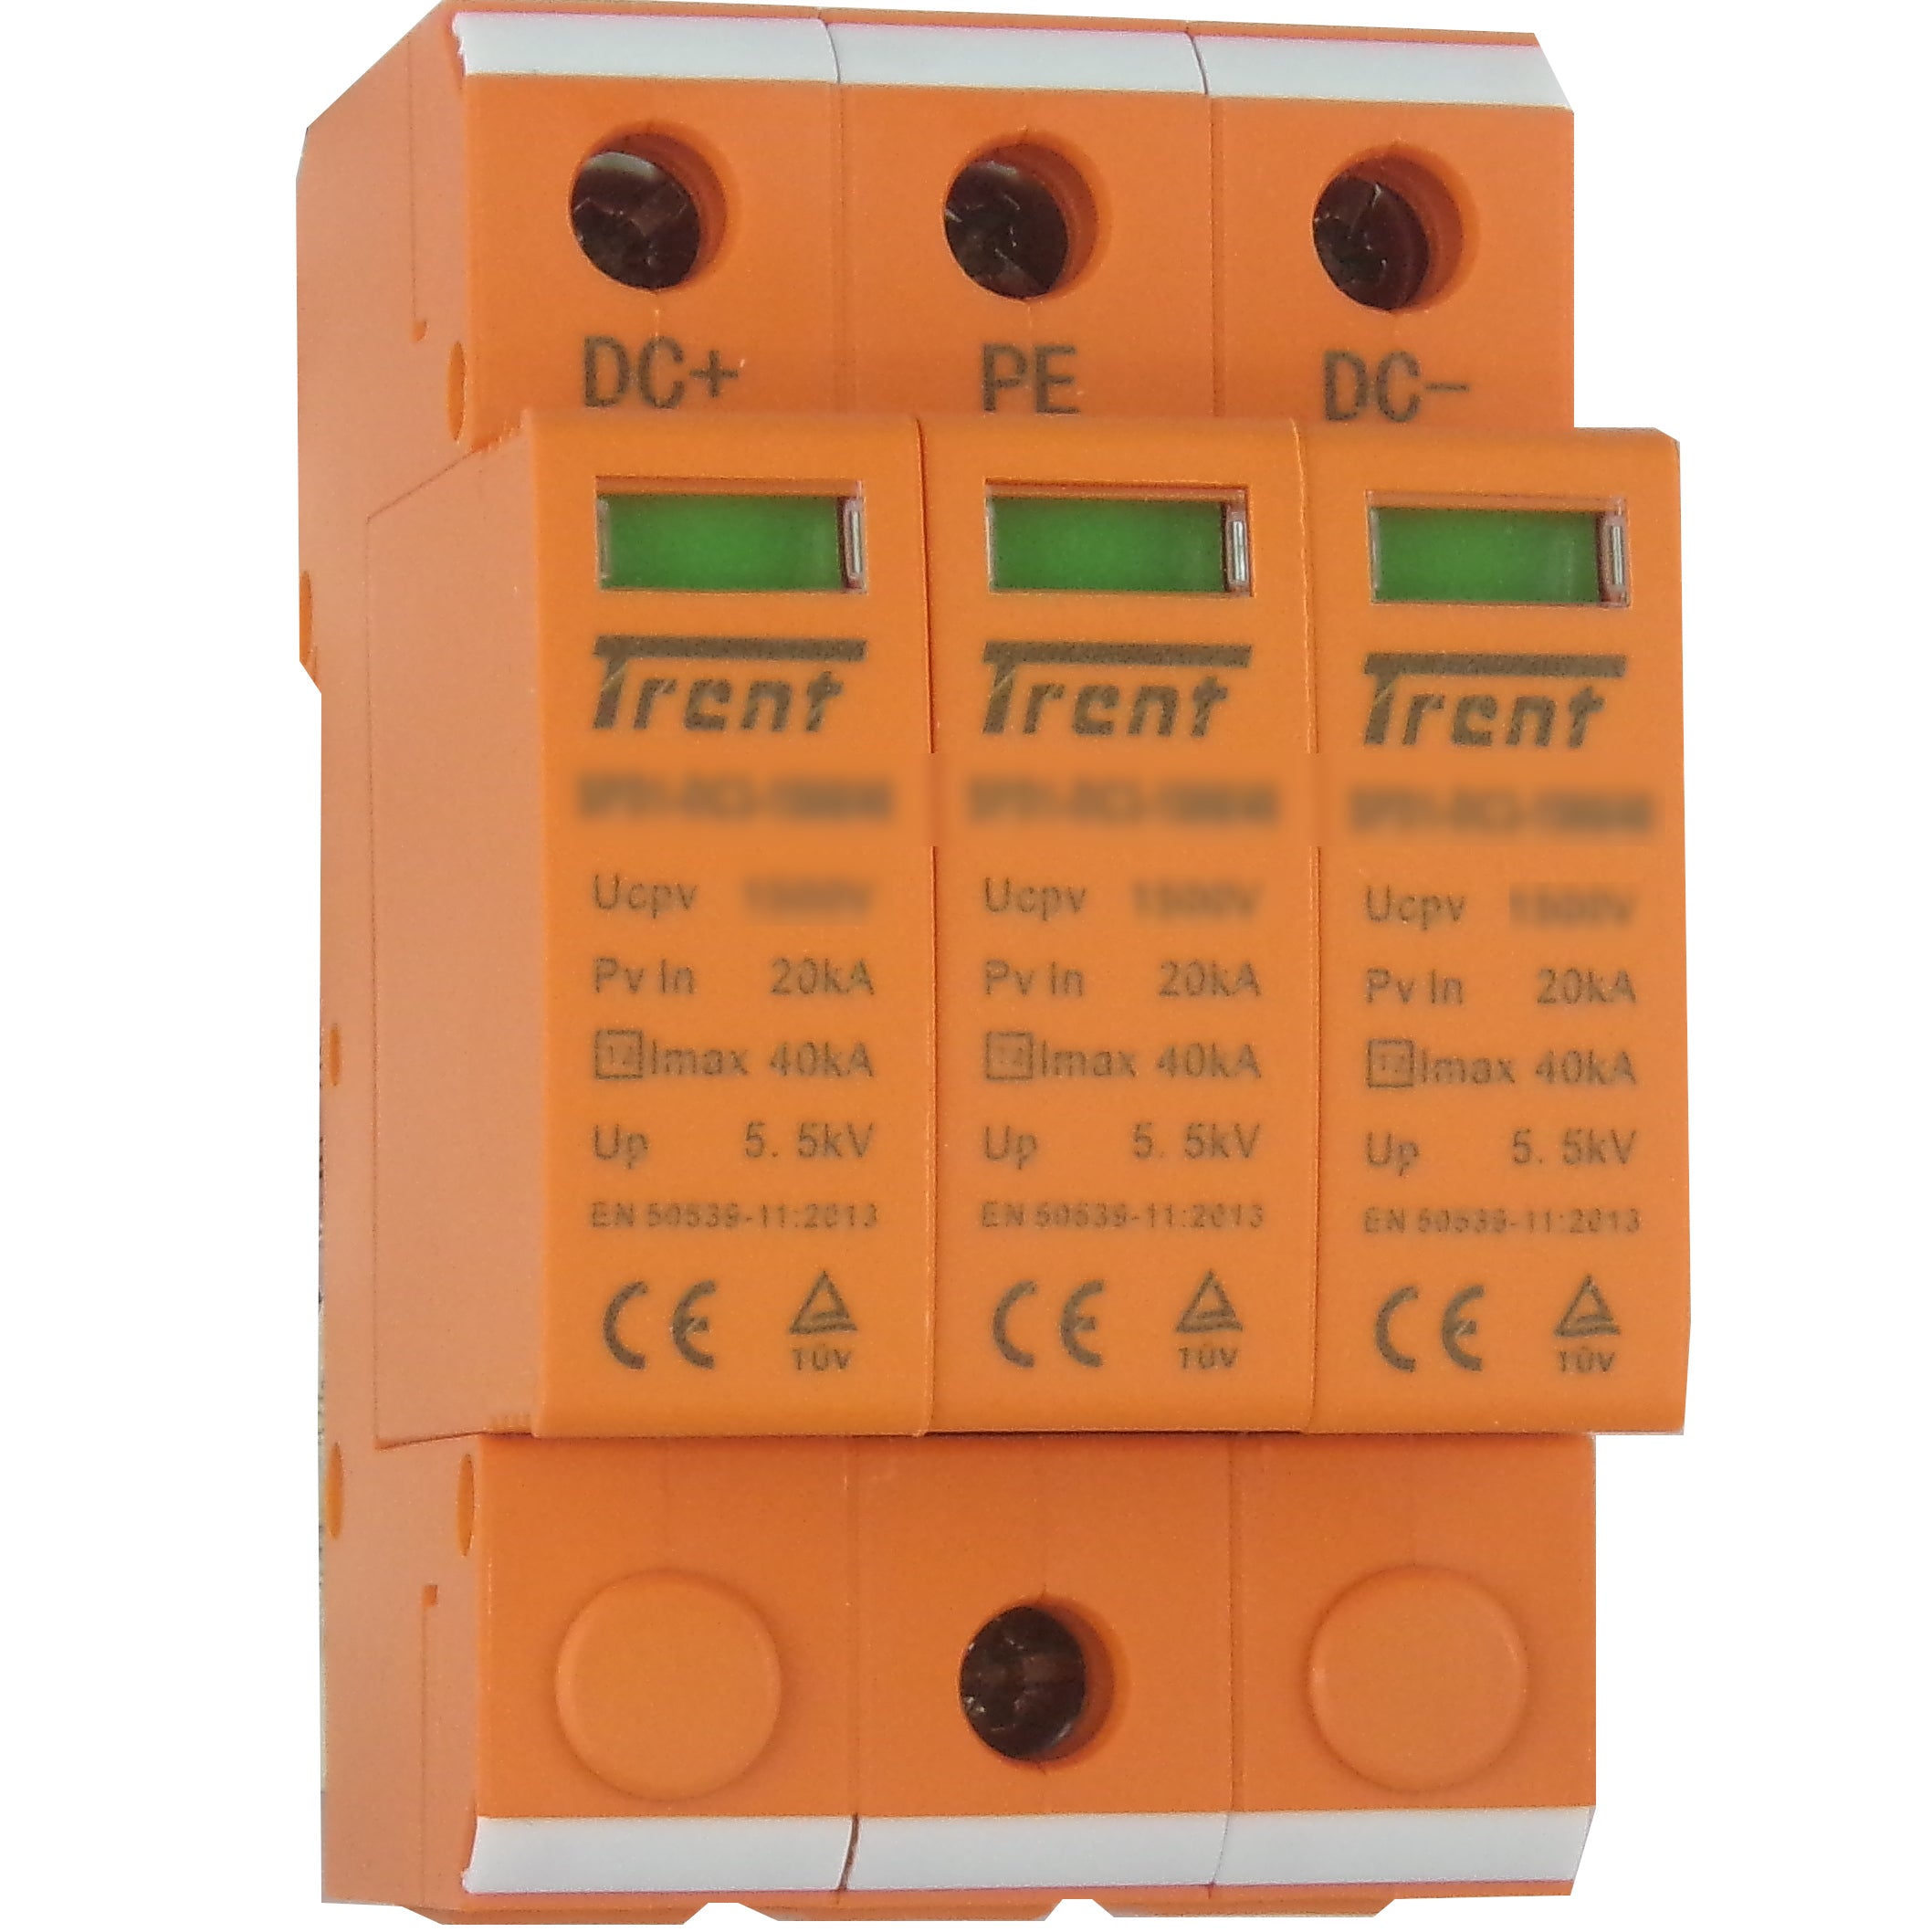 SPD1-DC/3-600/40, 600VDC Surge Protection Device for Photovoltaic Systems, Type 2 40kA